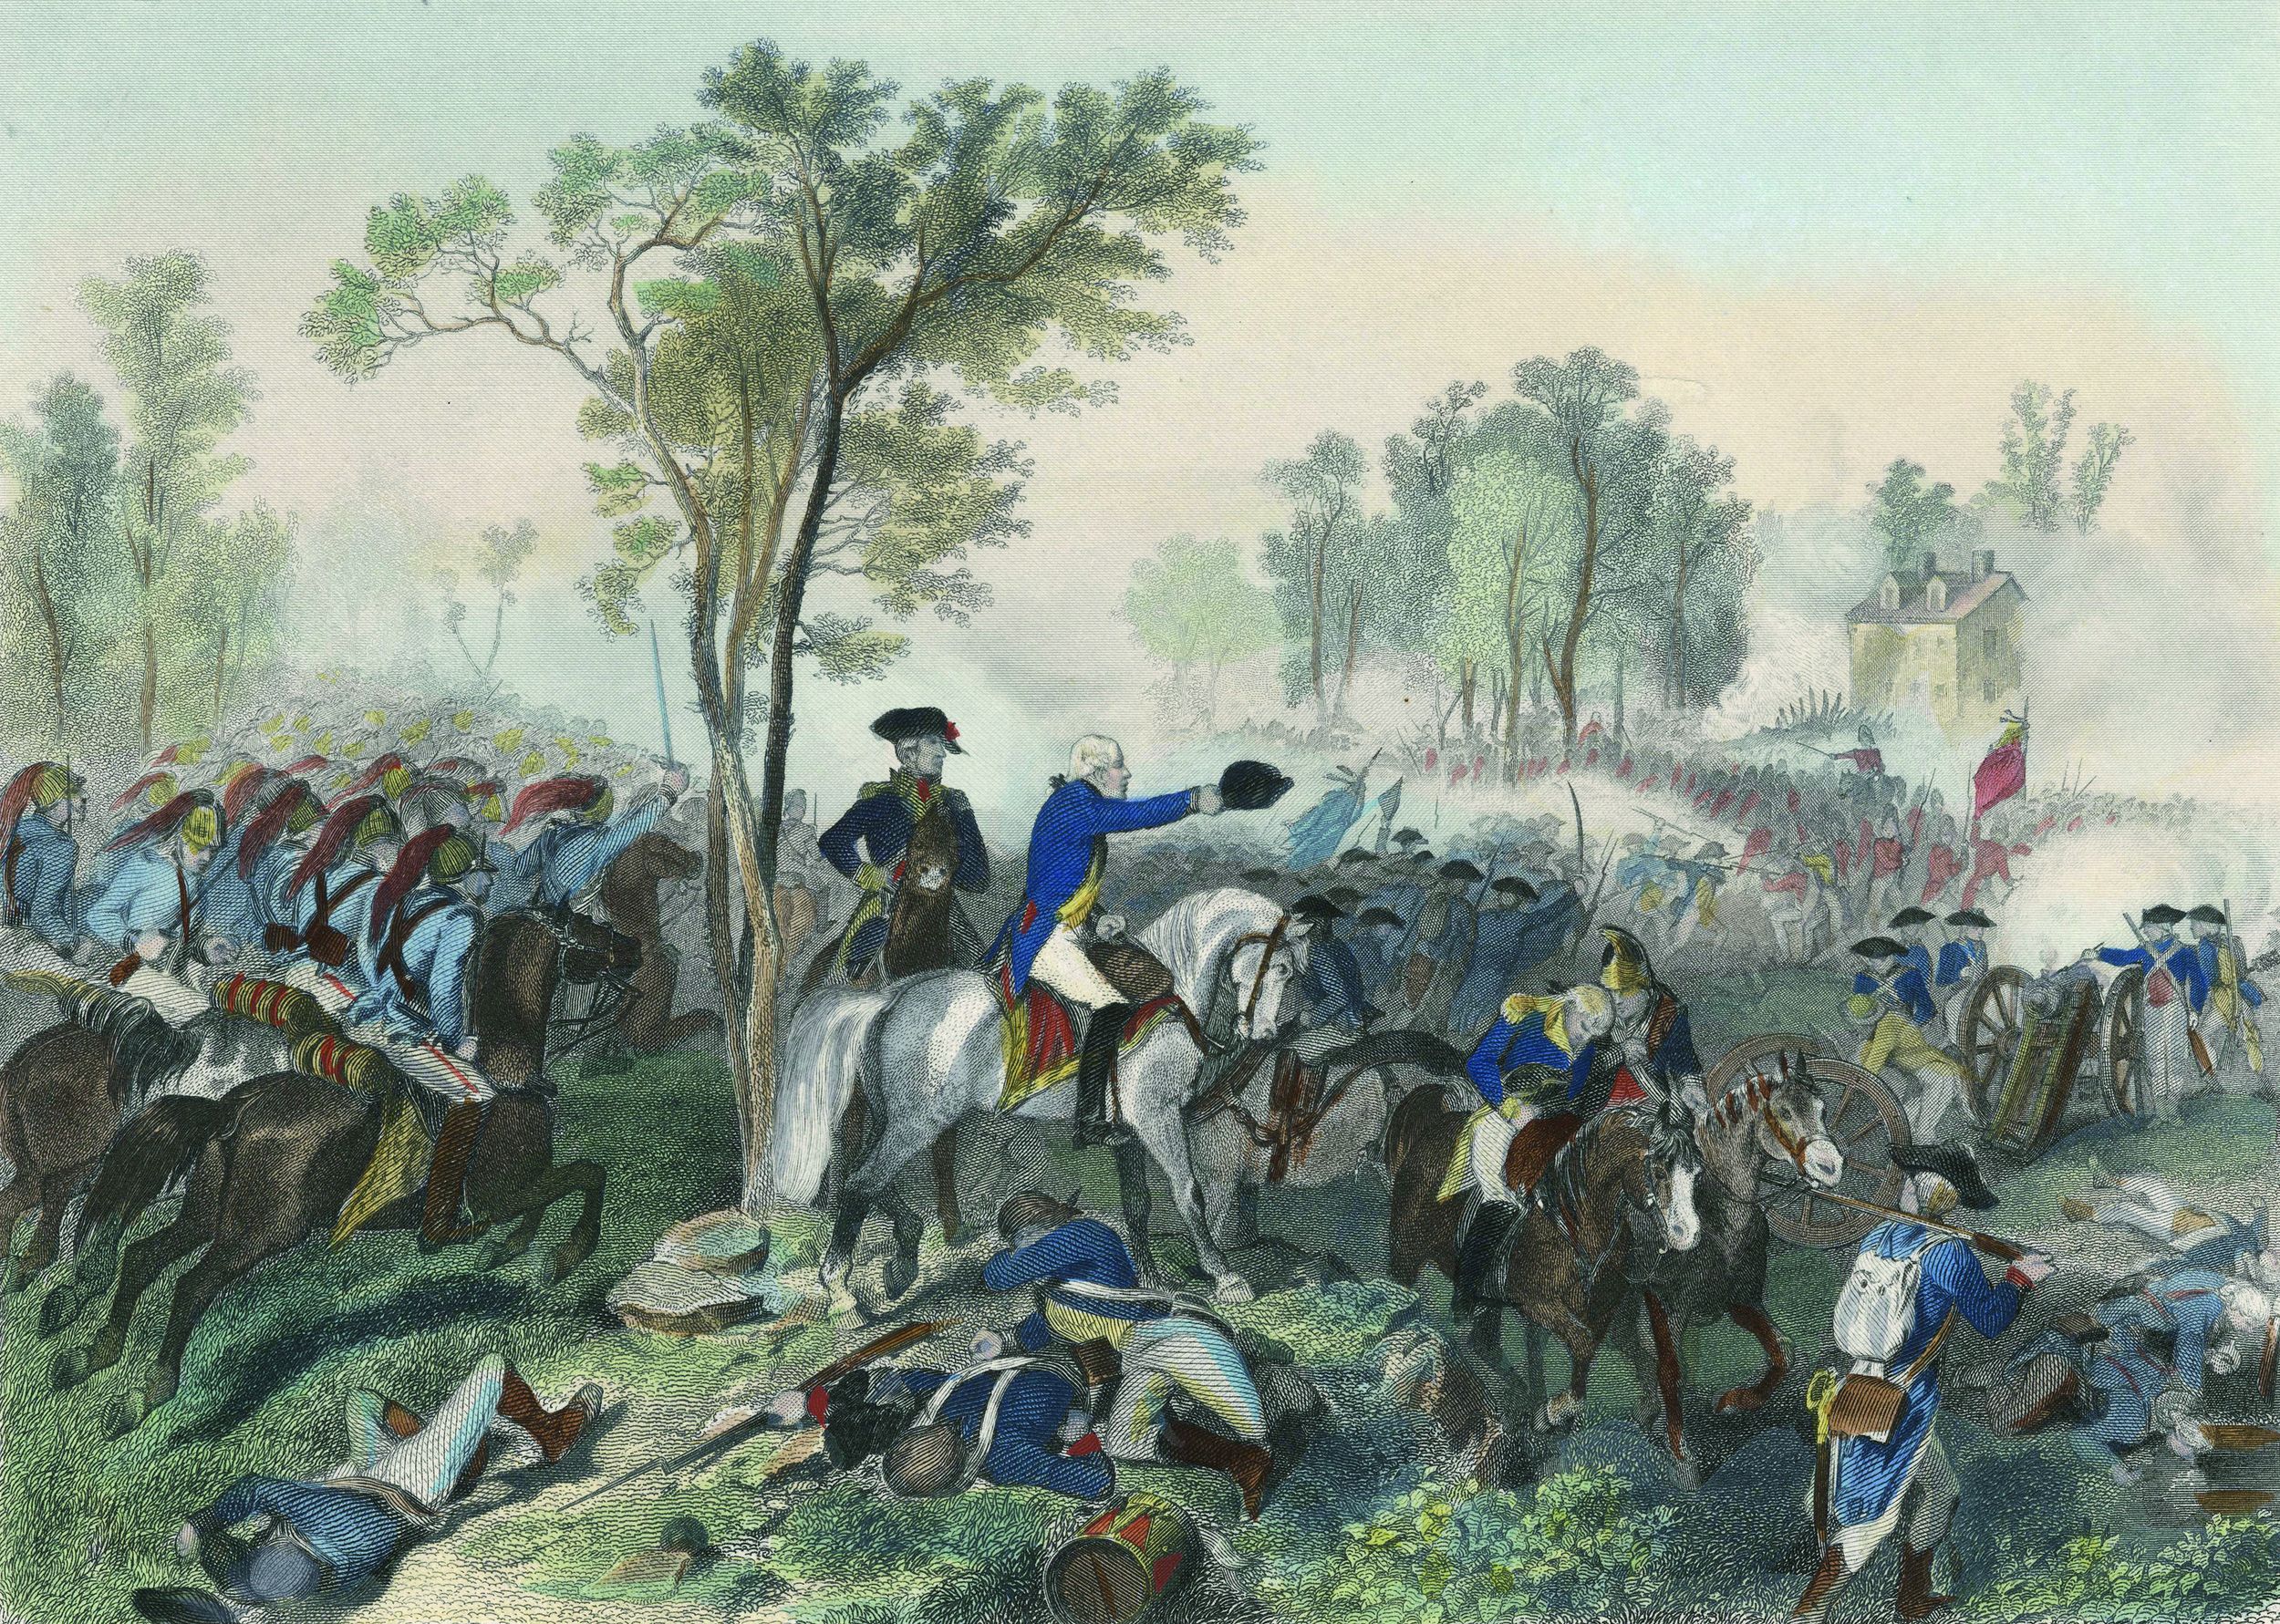 With Maj. Gen. Nathanael Greene urging them on, American forces push back British and Loyalist troops at Eutaw Springs while Lieutenant William Gaines’s artillery blasts away. 